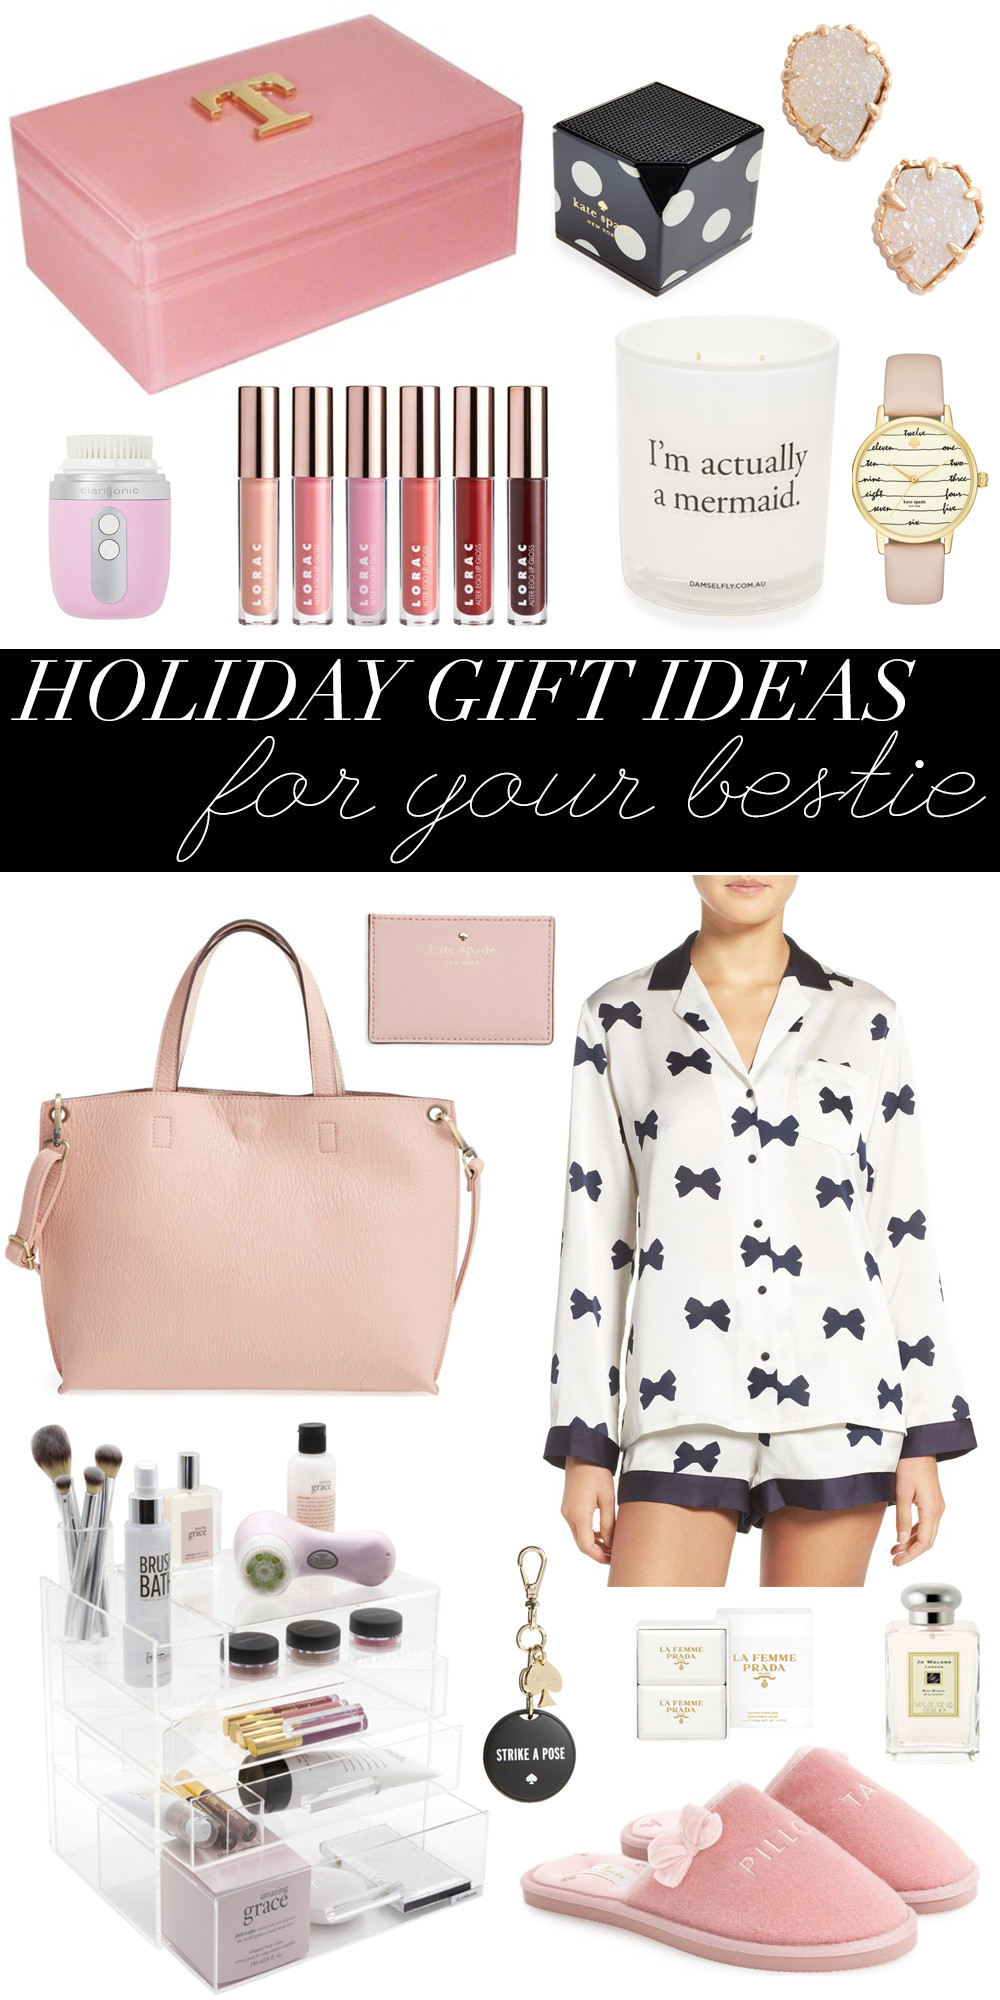 Gift Ideas For Your Best Friend
 Holiday Gift Ideas For Your Best Friend Giveaway Money